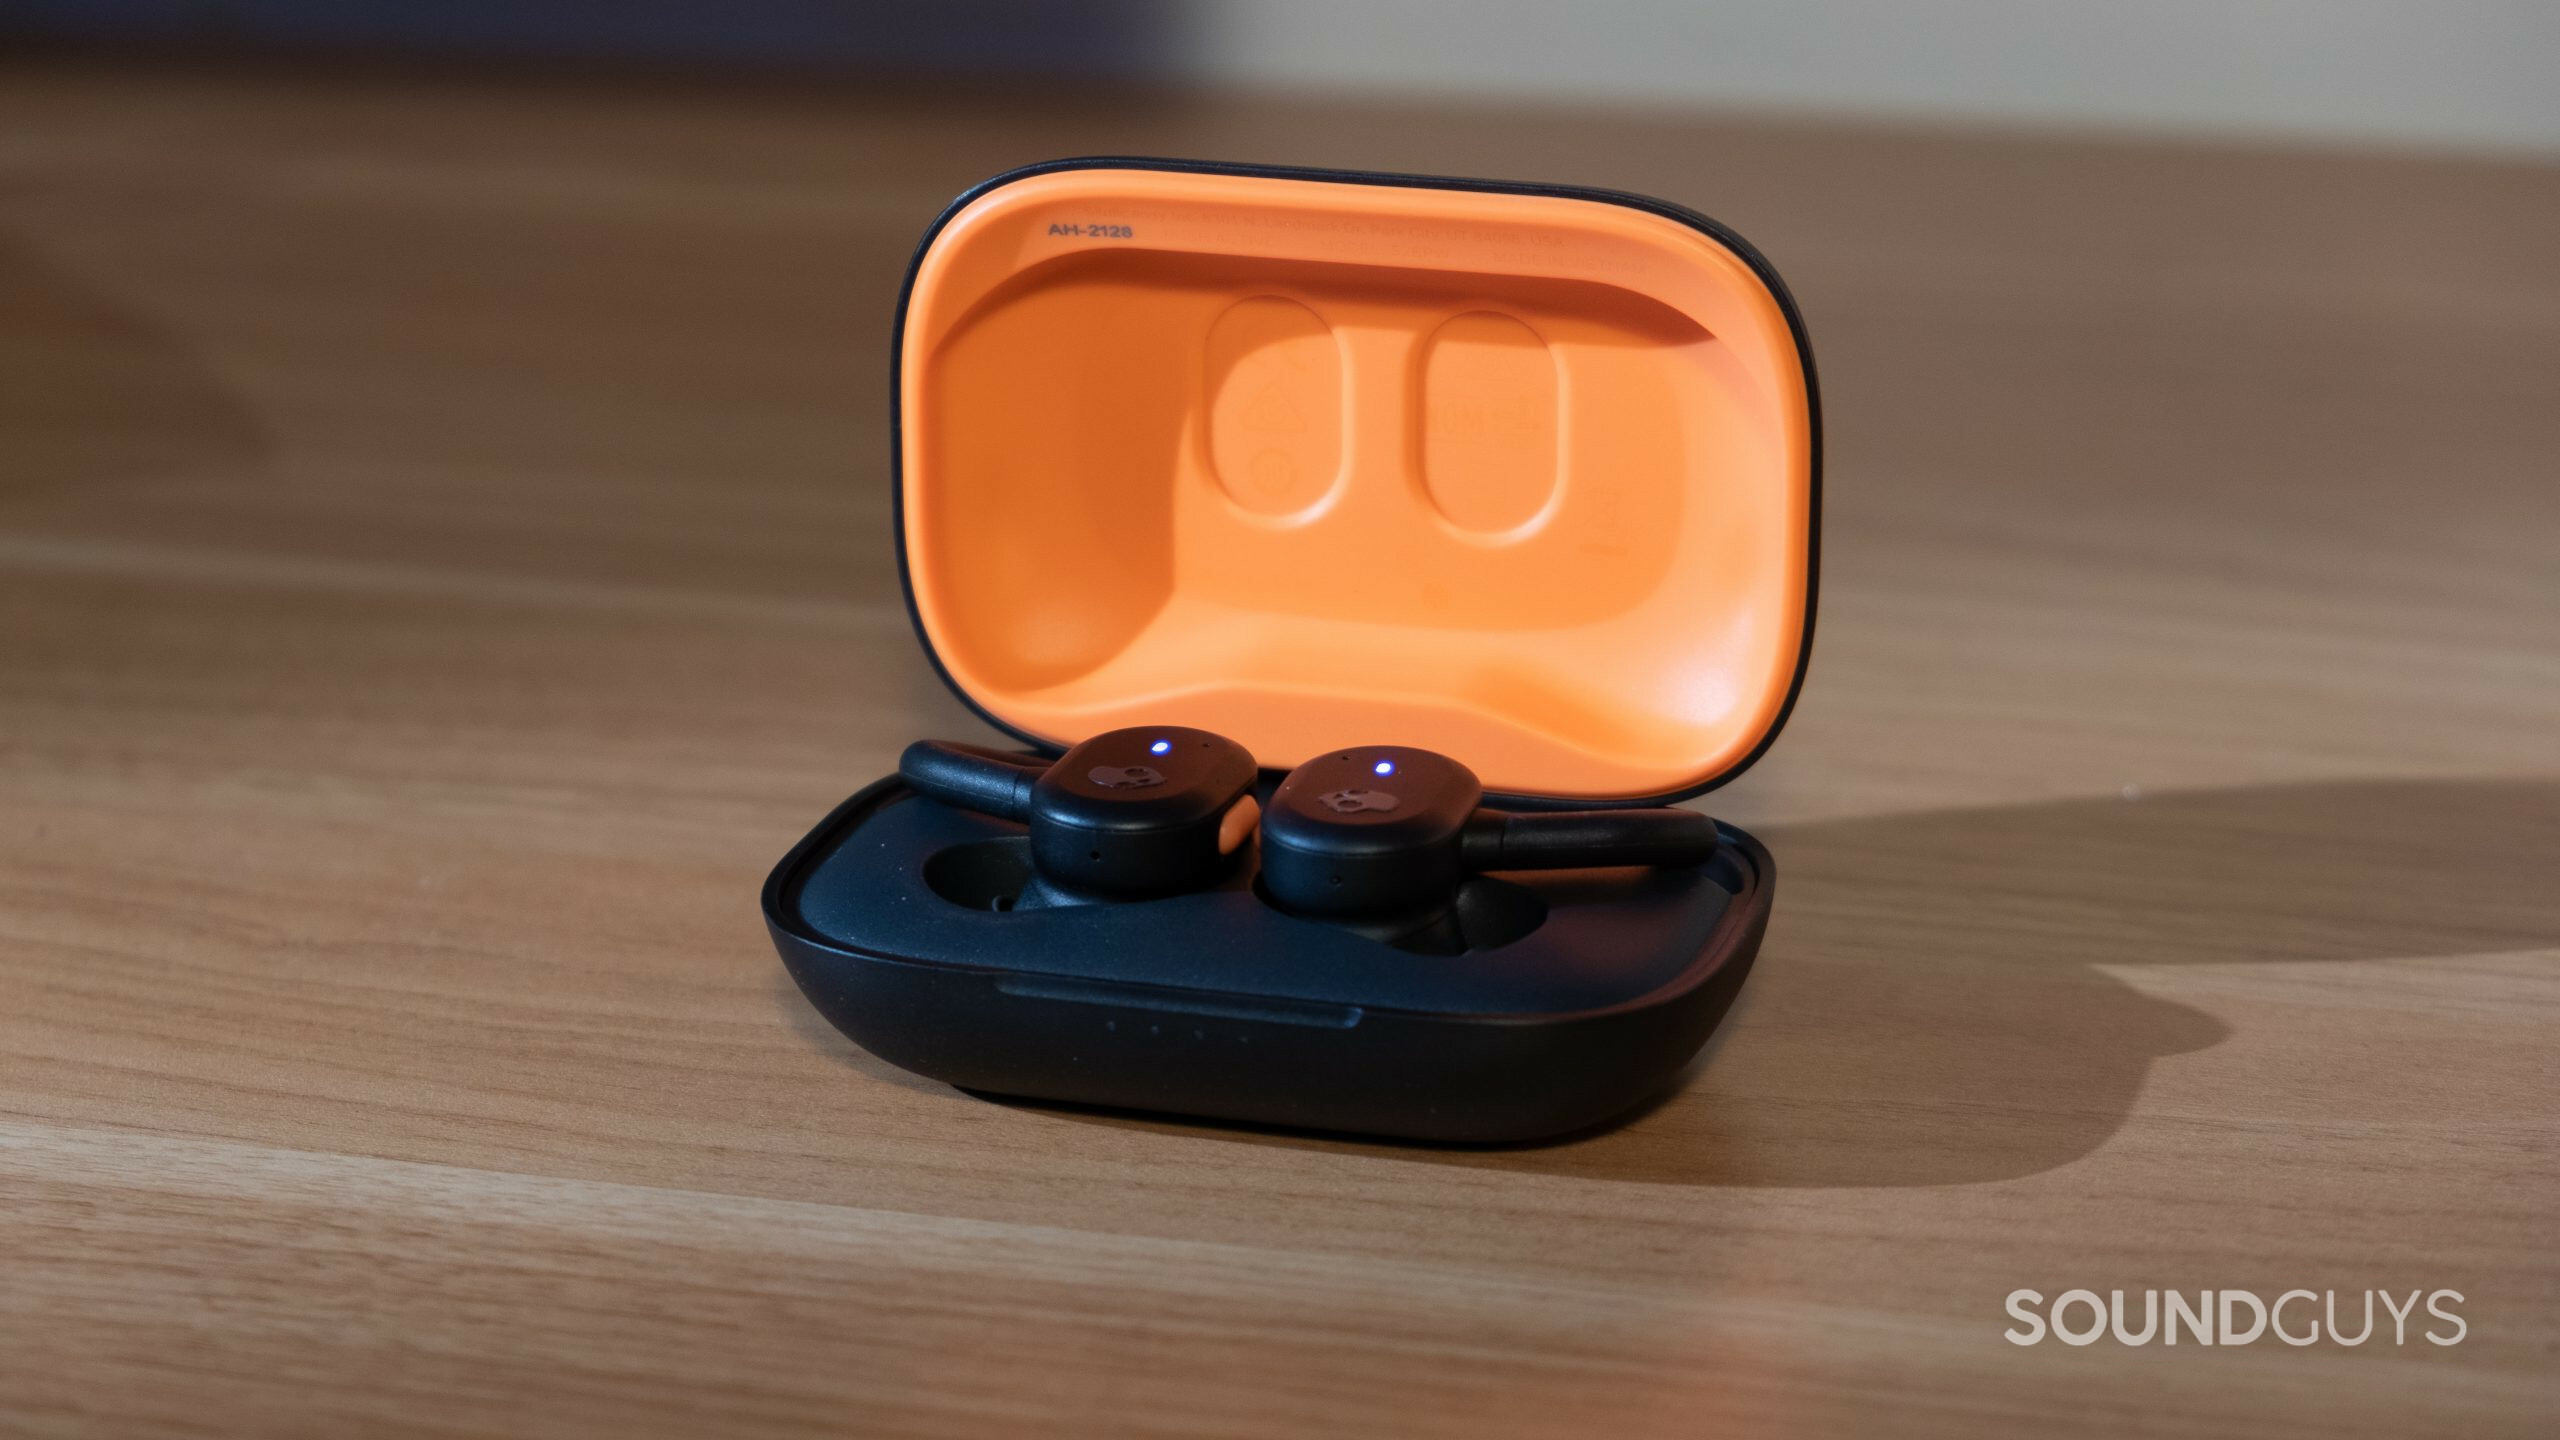 Mod True Wireless Earbuds Compatible with the Skullcandy App